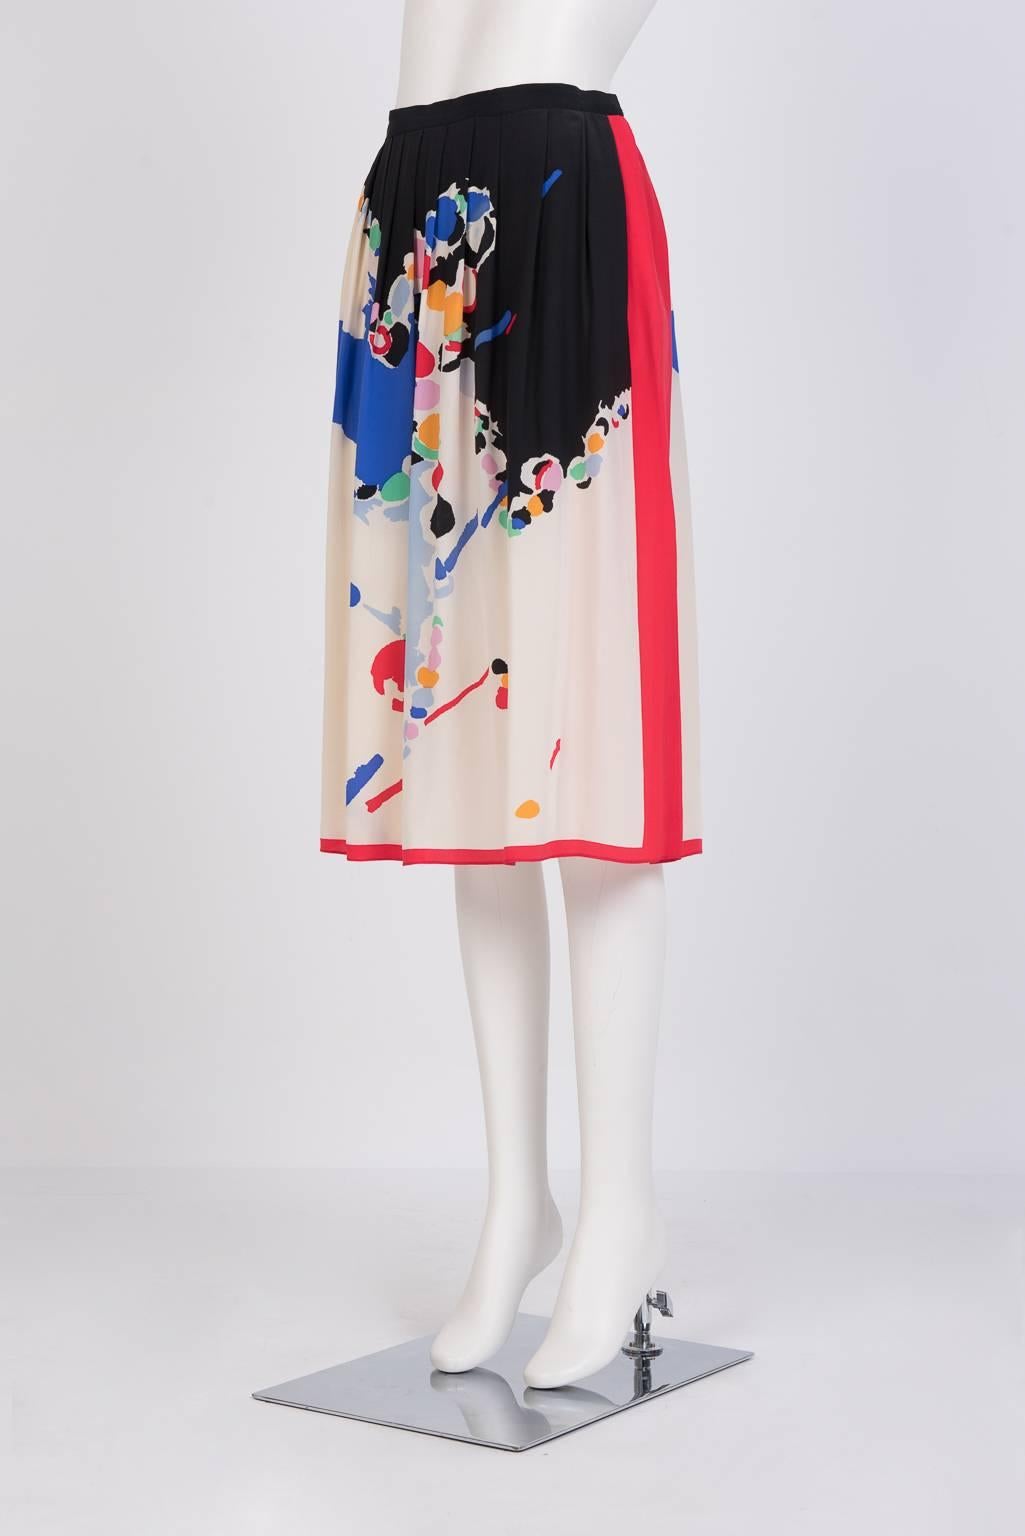 Knee-length knife-pleated skirt in a multi-coloured modernist-motif print with bold red edges.
Carre-style scarf  in multi-coloured modernist-motif print with bold red edges. 